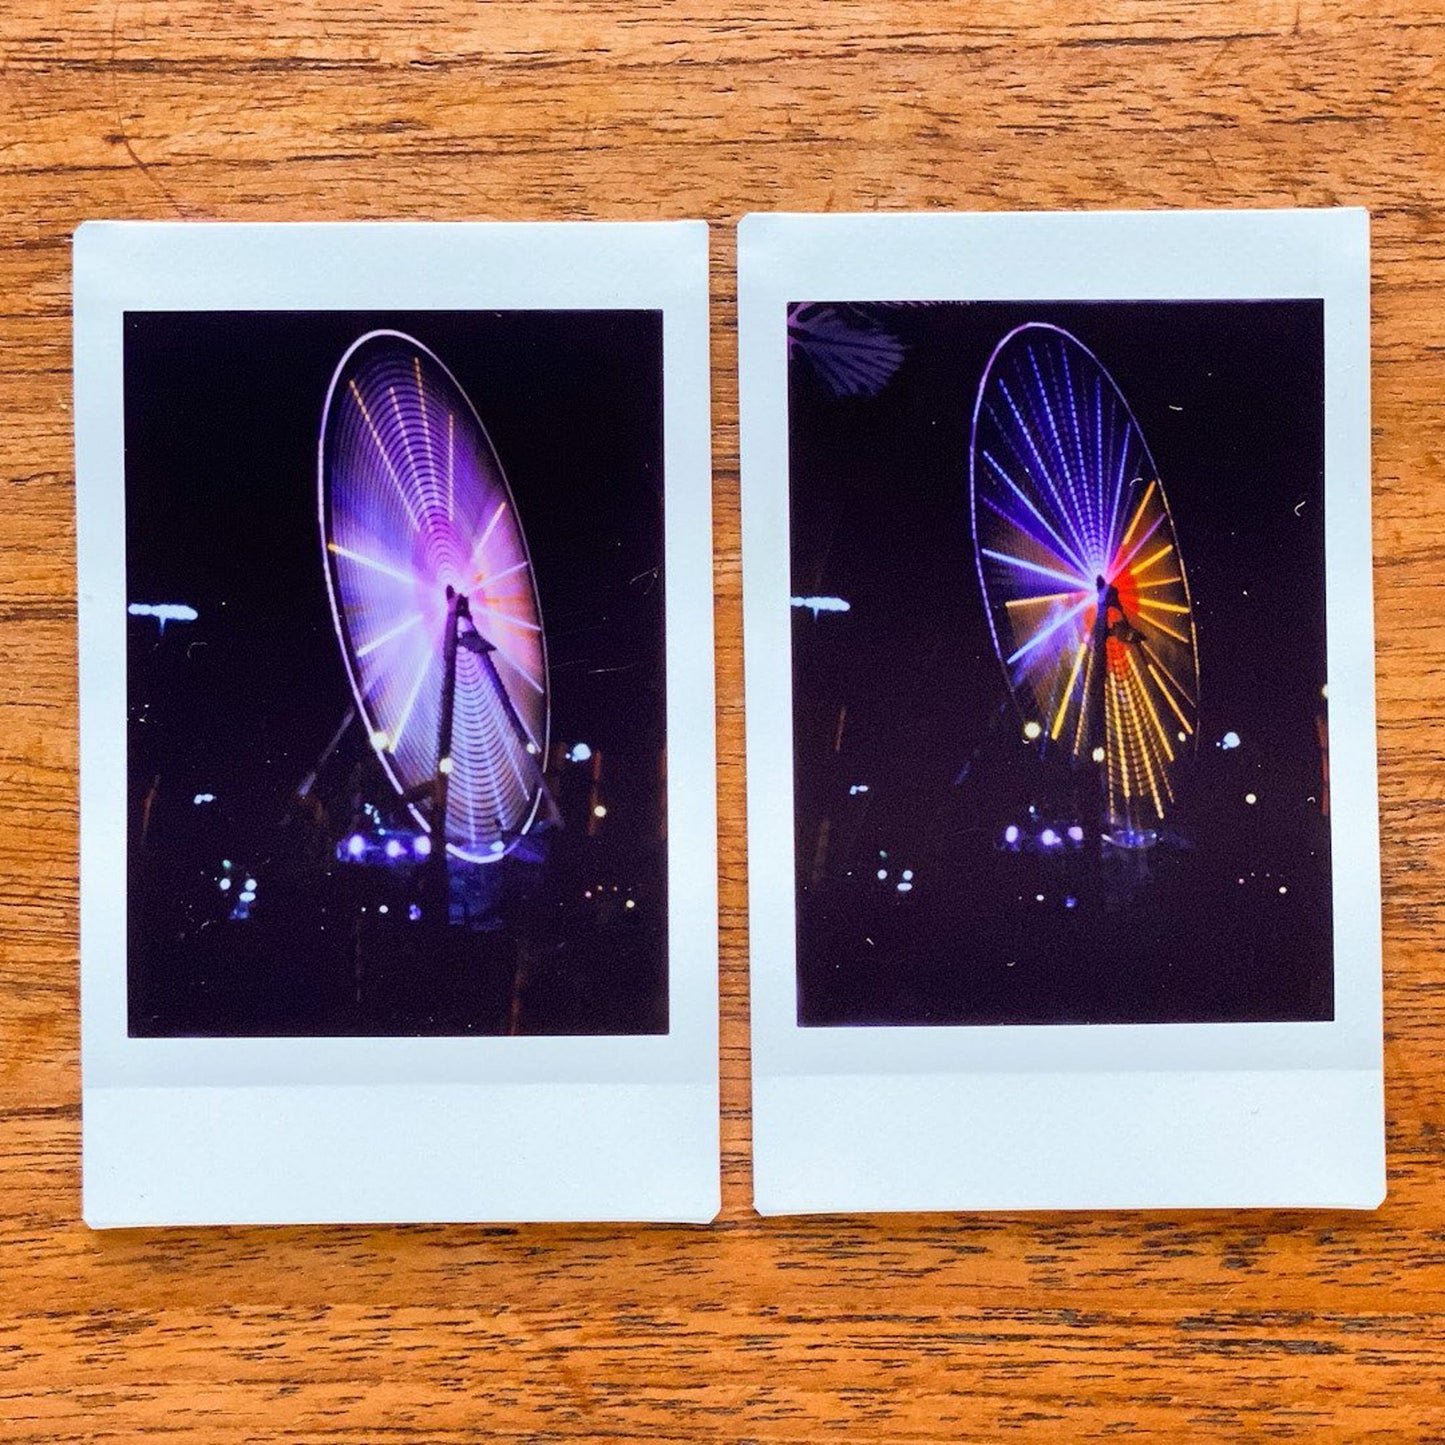 Two instant photos taken with a Jollylook Pinhole Mini camera, positioned on a table, showcasing the iconic silhouette of a Ferris wheel